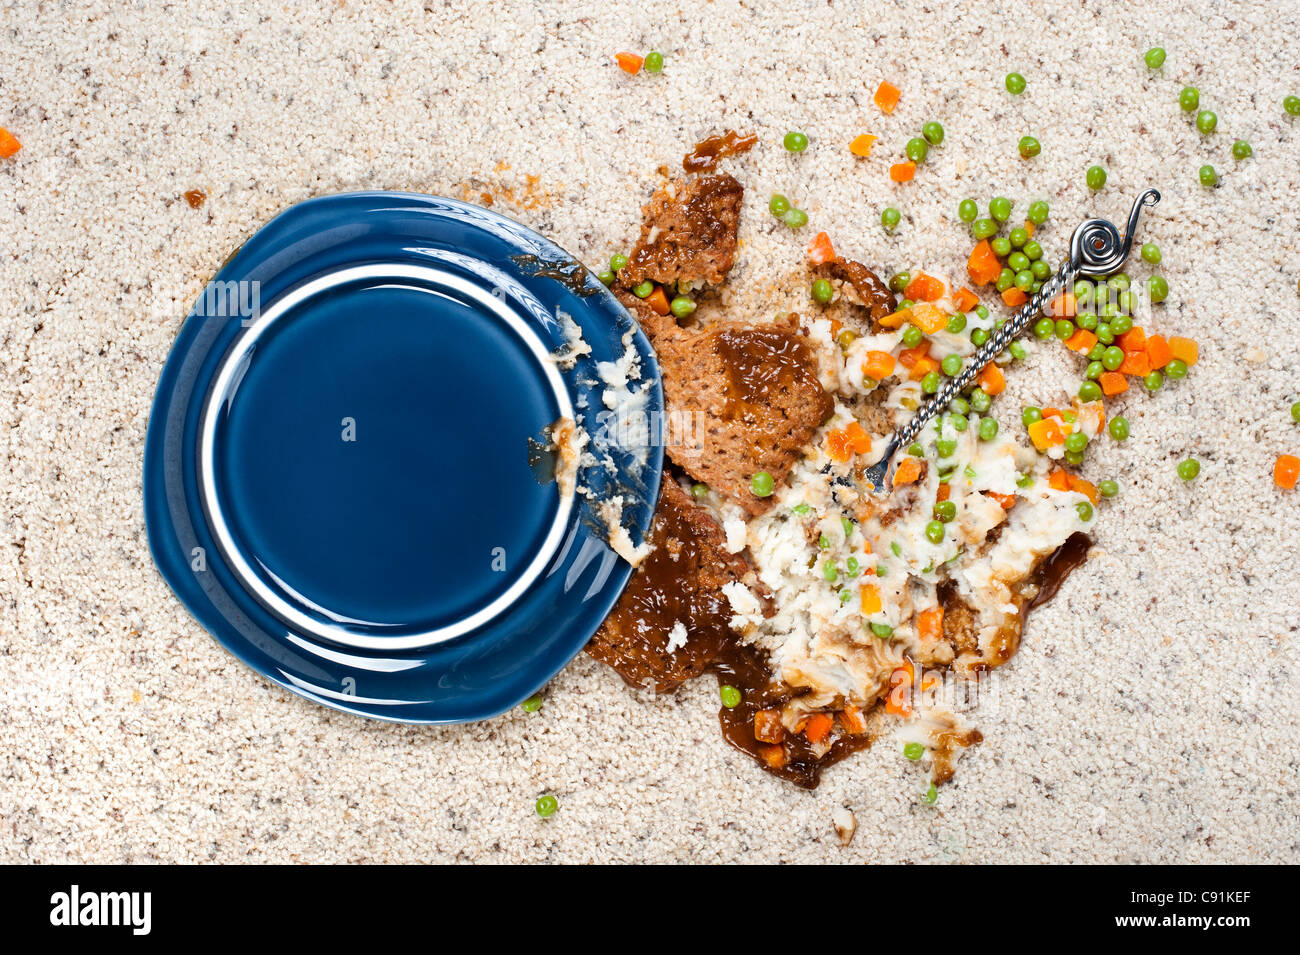 A plate of meatloaf with mashed potatoes and peas dropped on new carpet. Stock Photo